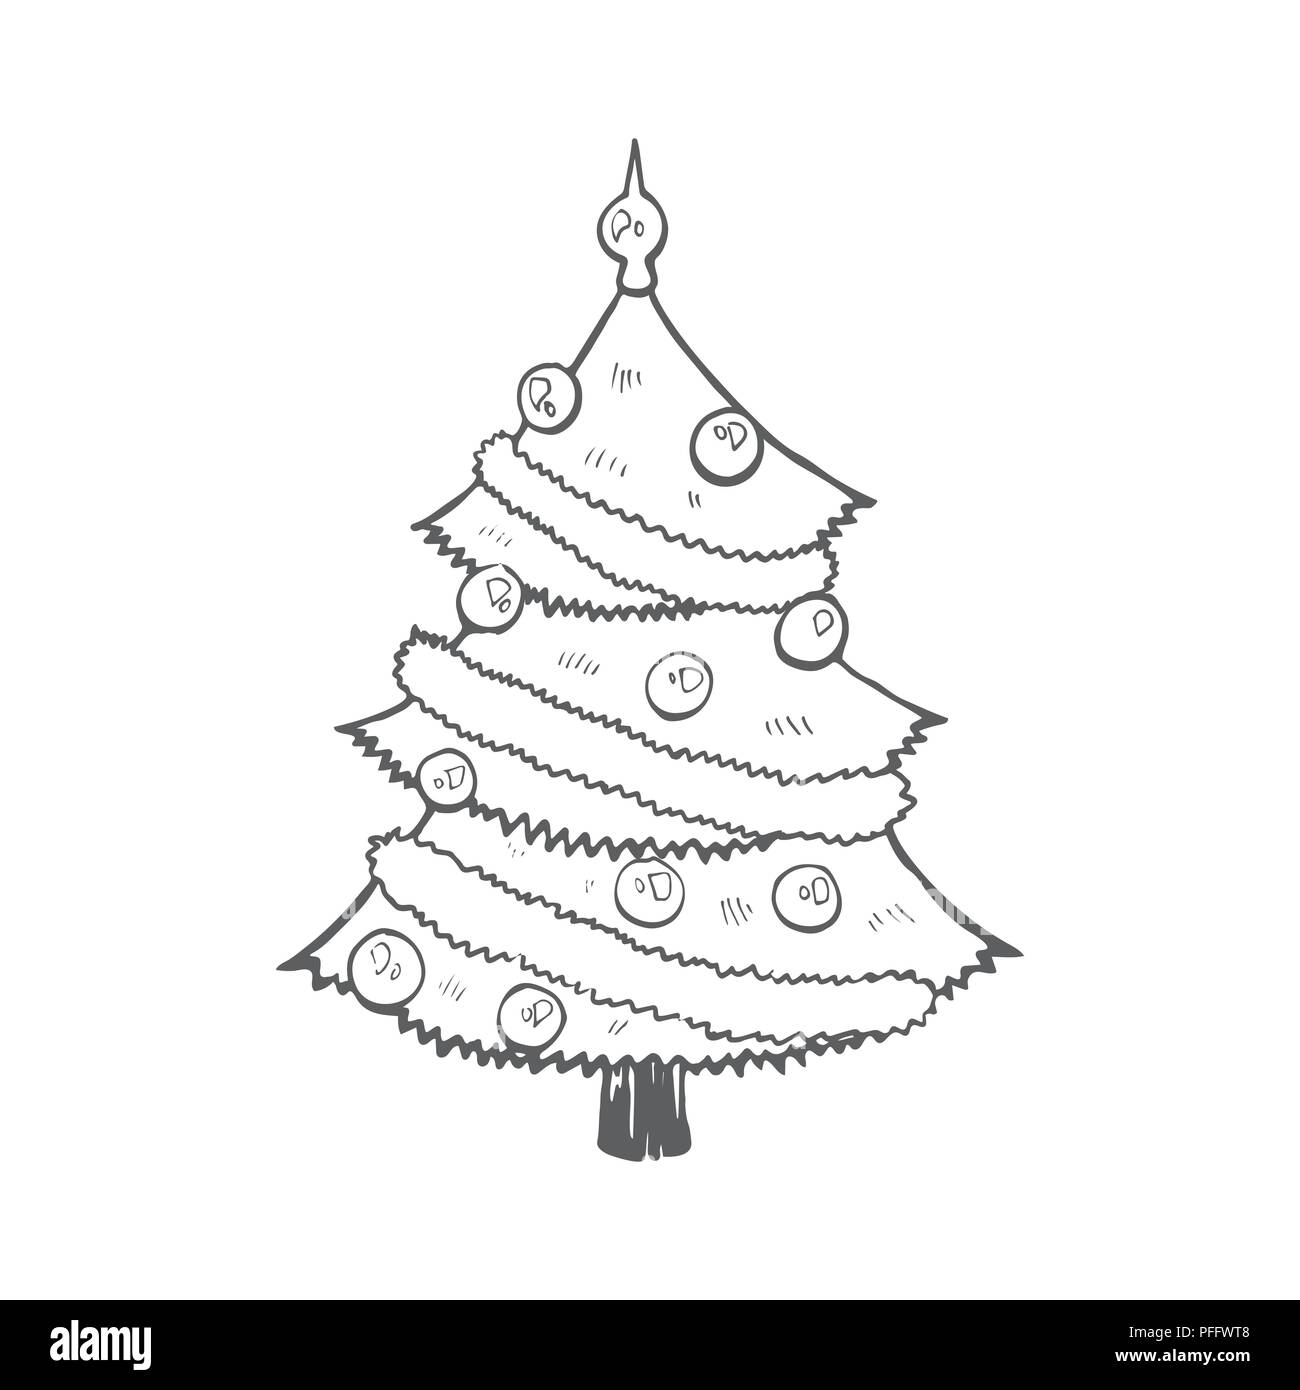 christmas symbol doodle Stock Vector